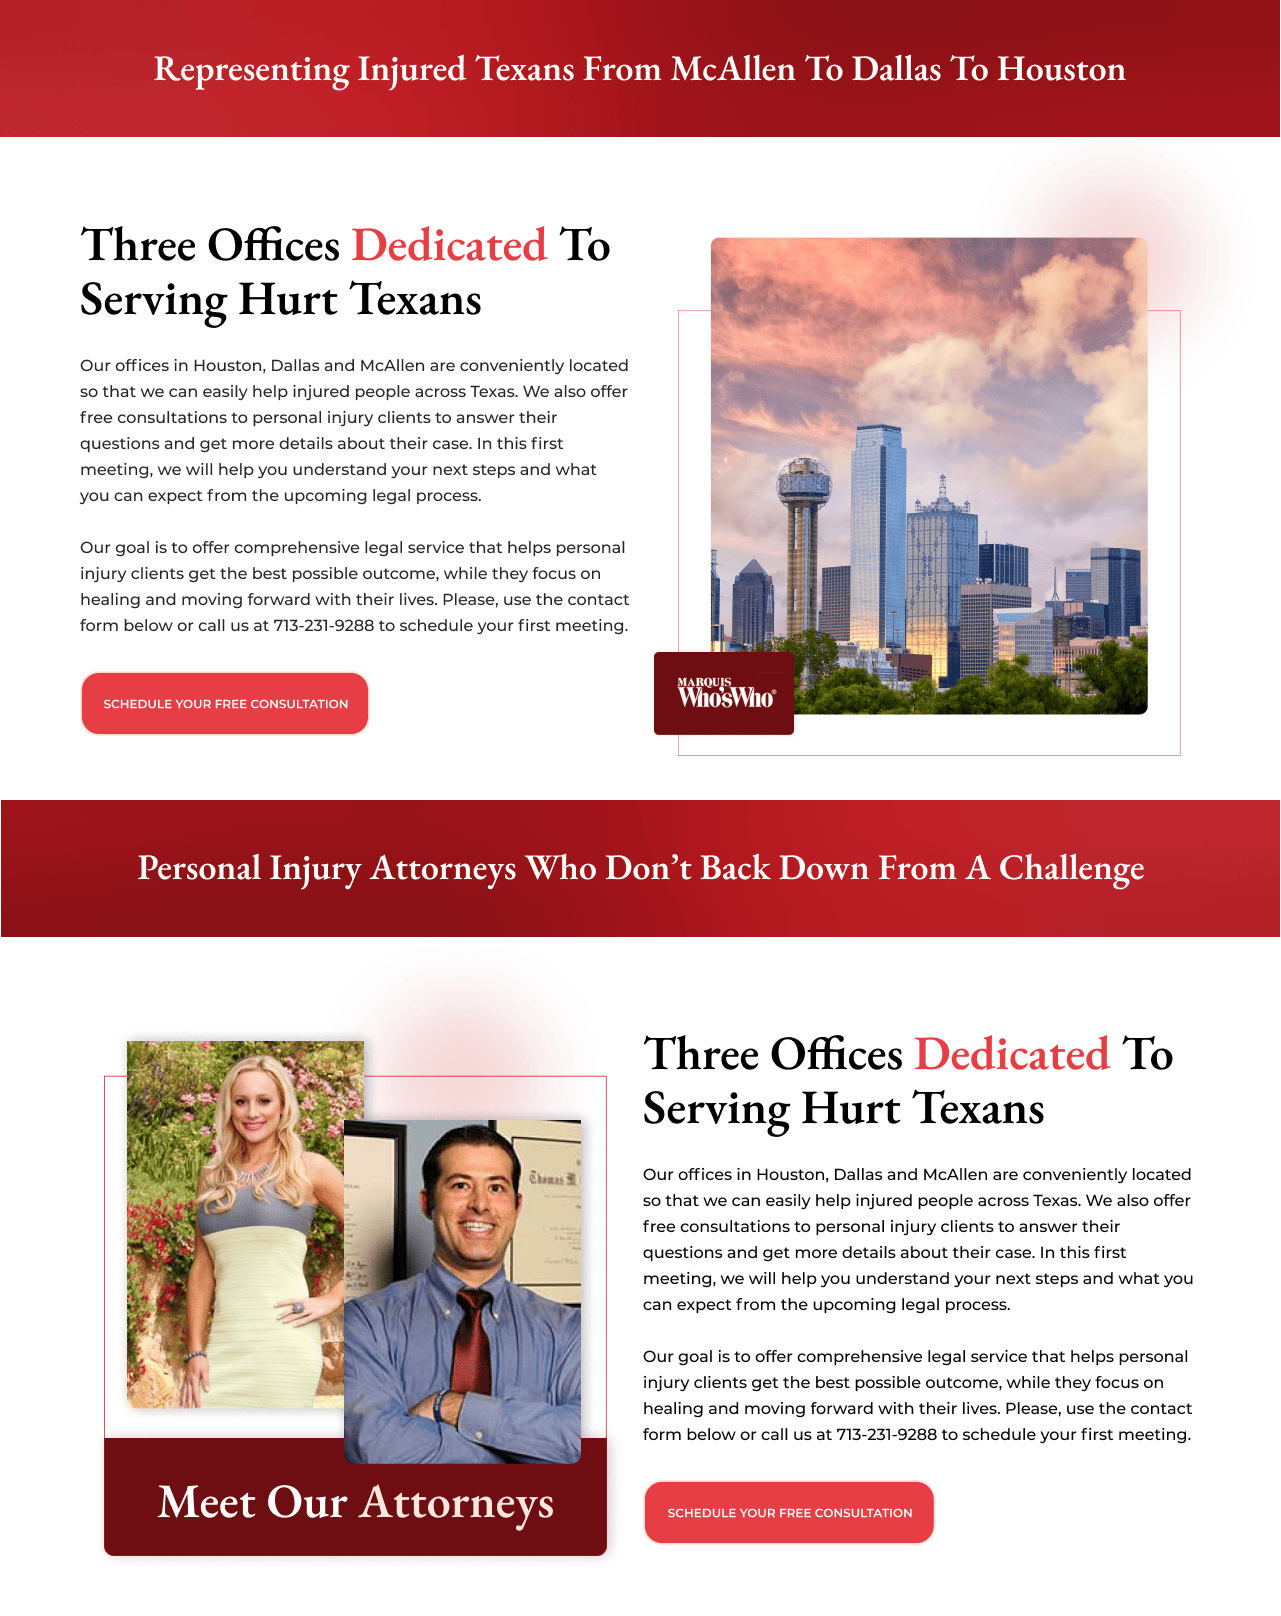 The homepage of a law firm website.